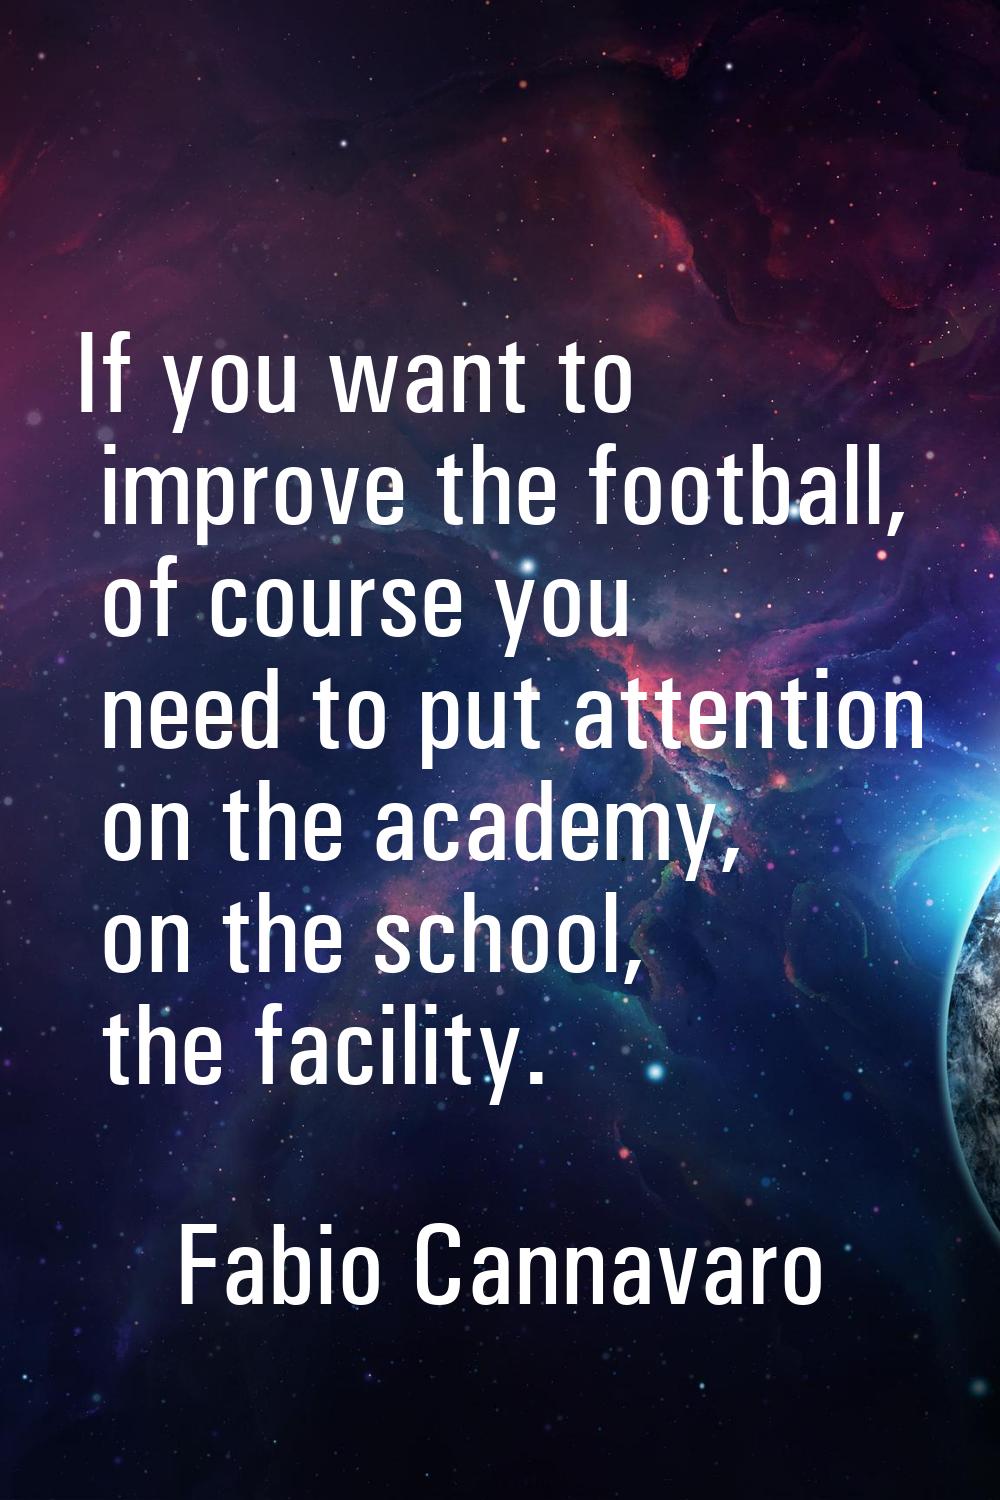 If you want to improve the football, of course you need to put attention on the academy, on the sch